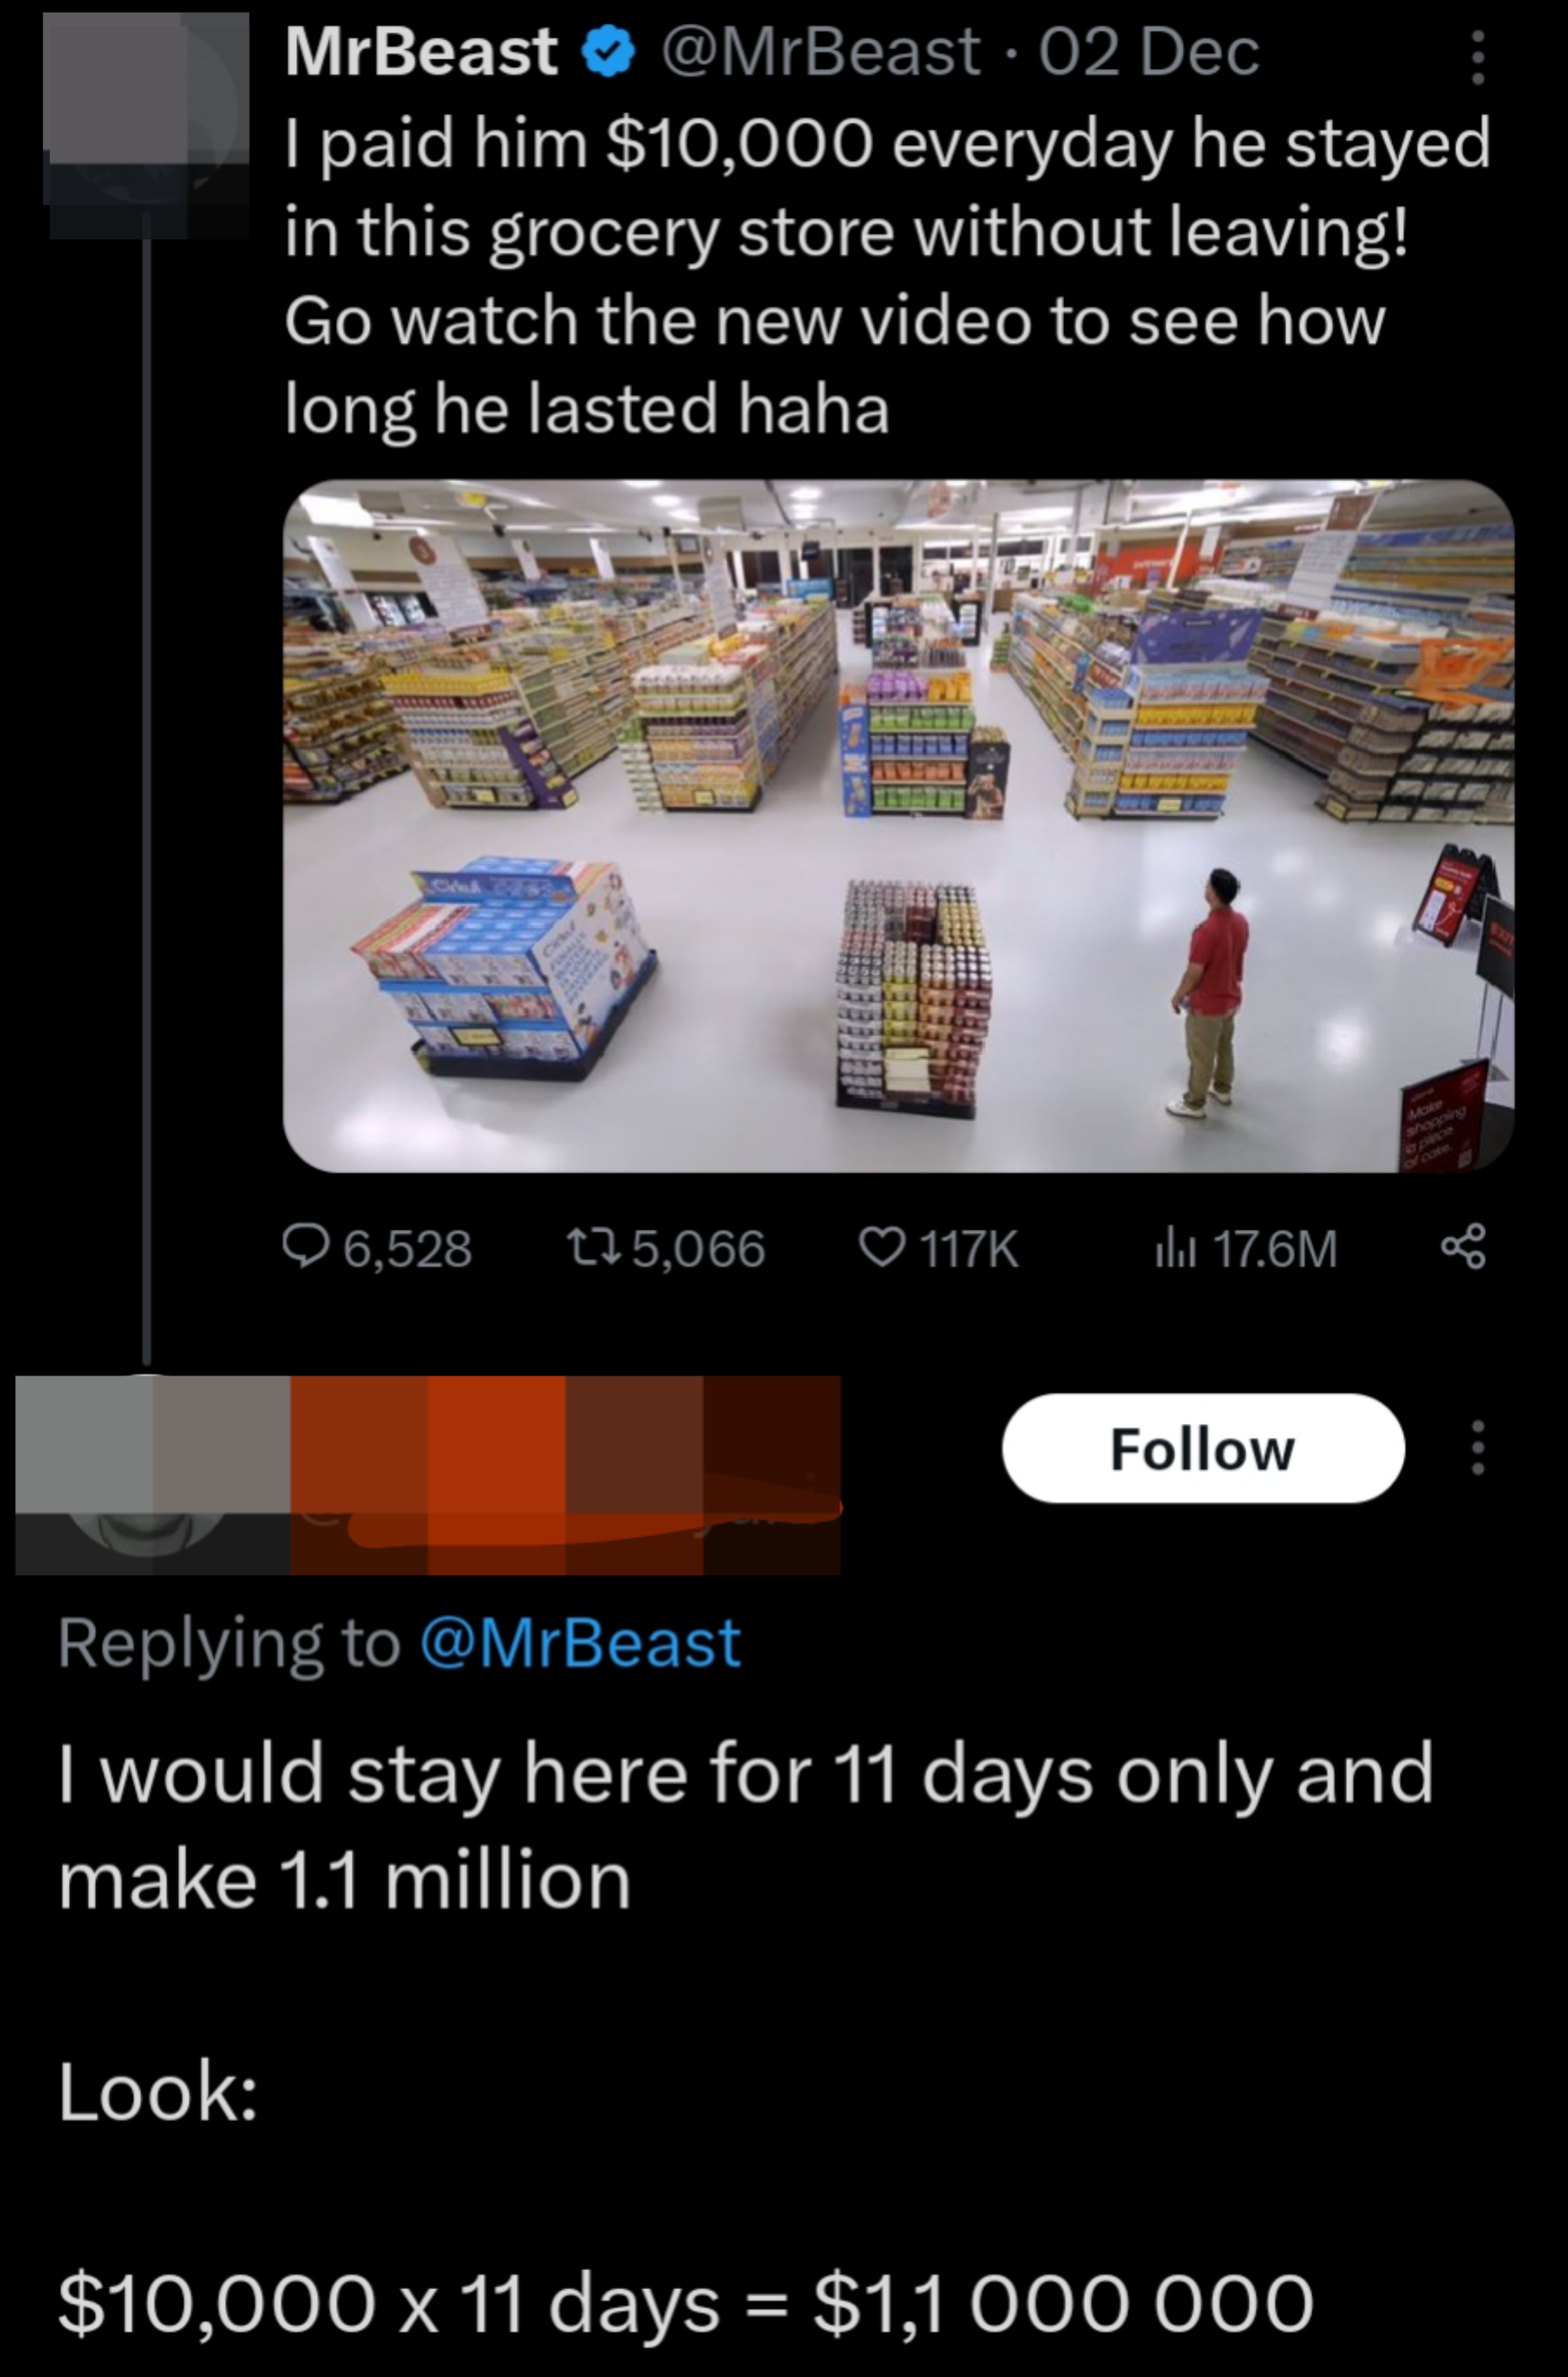 &quot;I paid him $10,000 every day he stayed in this grocery store w/o leaving&quot; w/response: &quot;I would stay here for 11 days only and make 1.1 million: $10,000 x 11 days = $1,1000,000